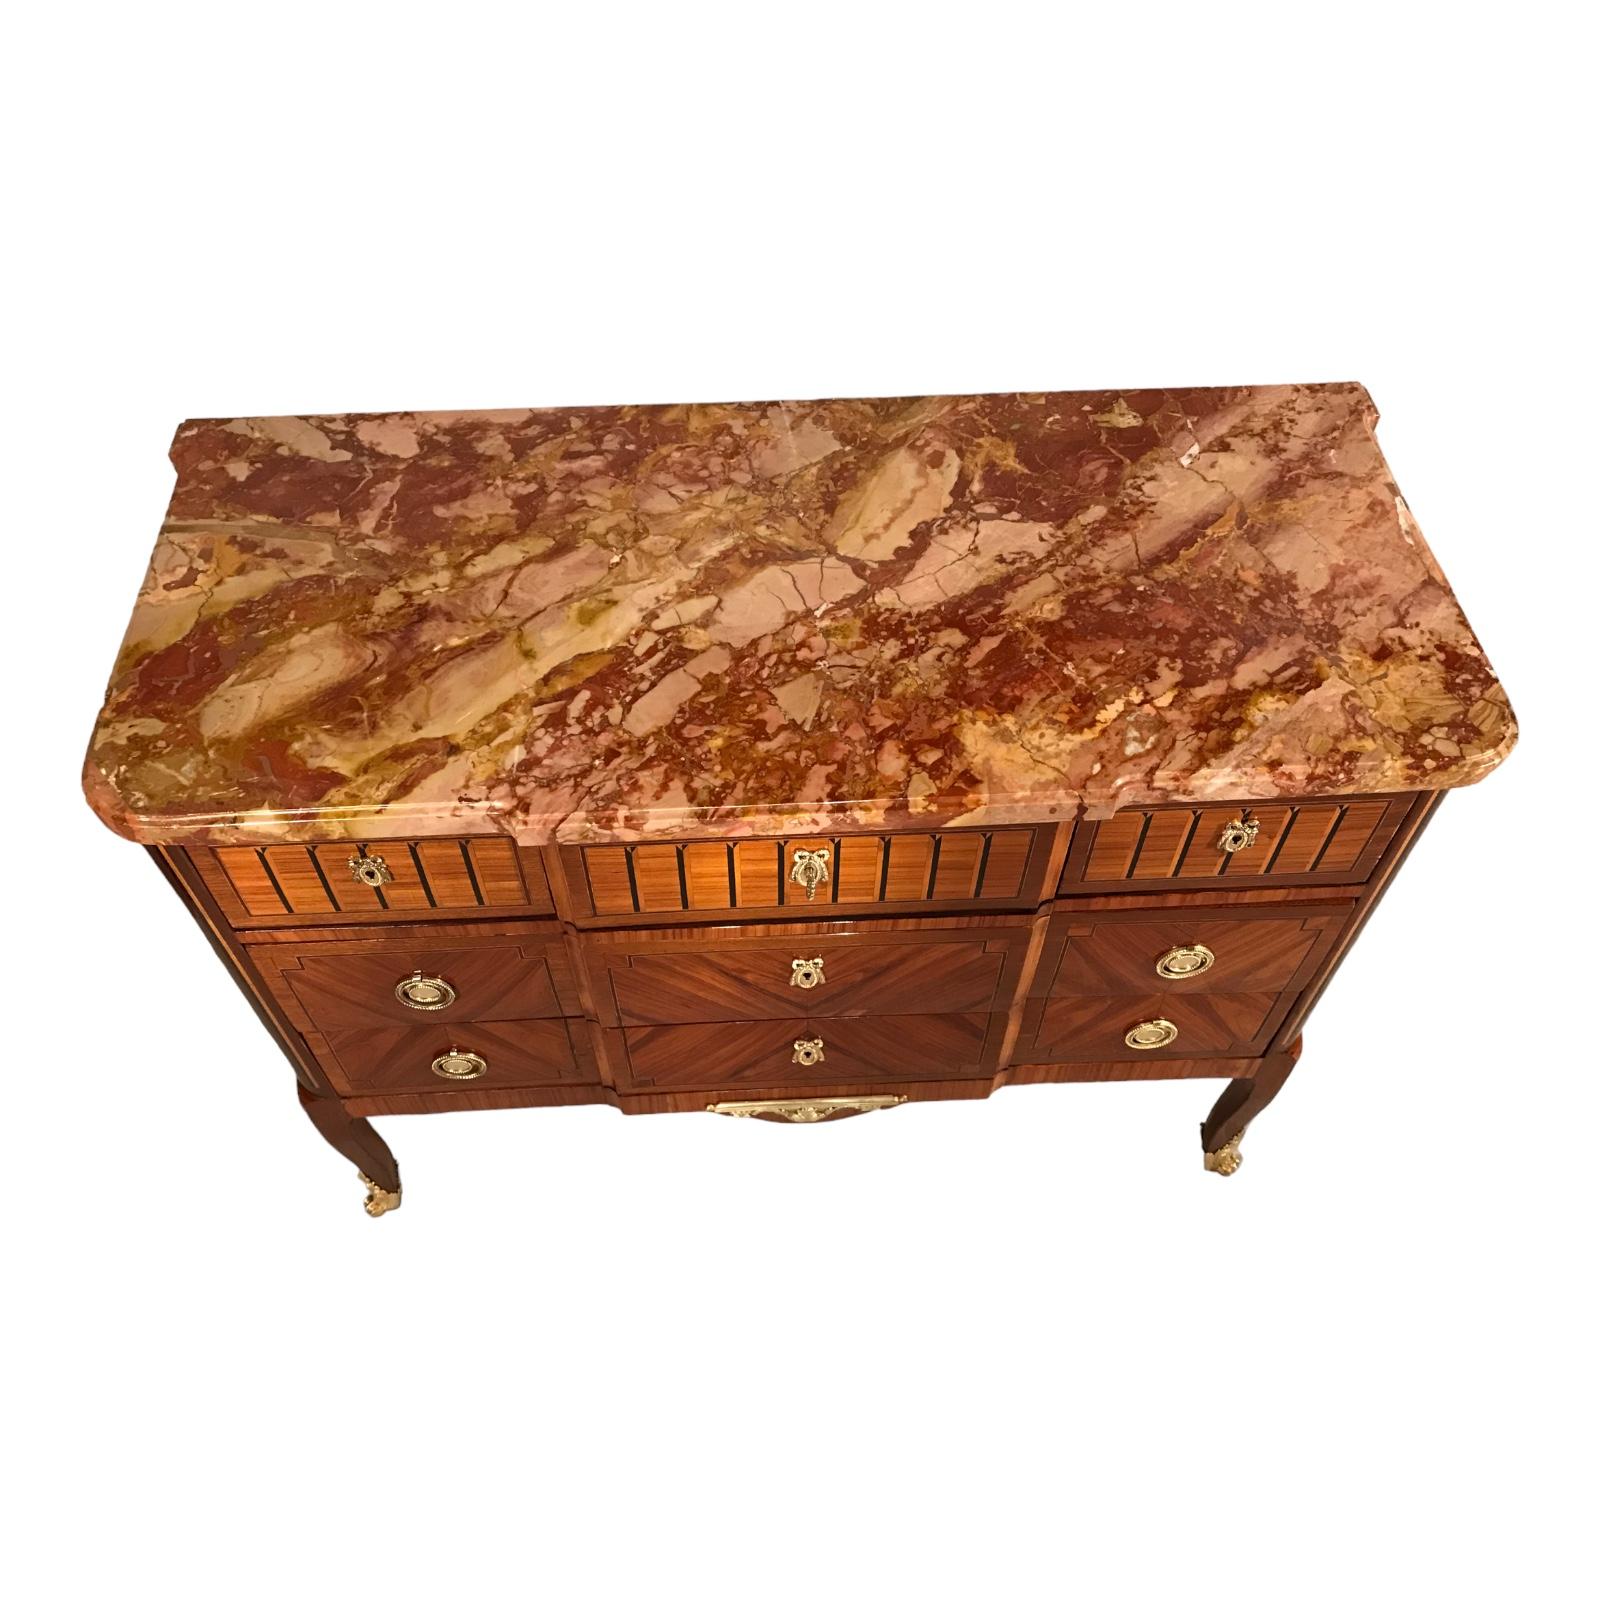 This exquisite Louis XVI-style chest of drawers originates from France and has been crafted around 1860. It boasts a stunning rosewood veneer adorned with marquetry bands made of mahogany and satinwood. The piece retains its original marble top,